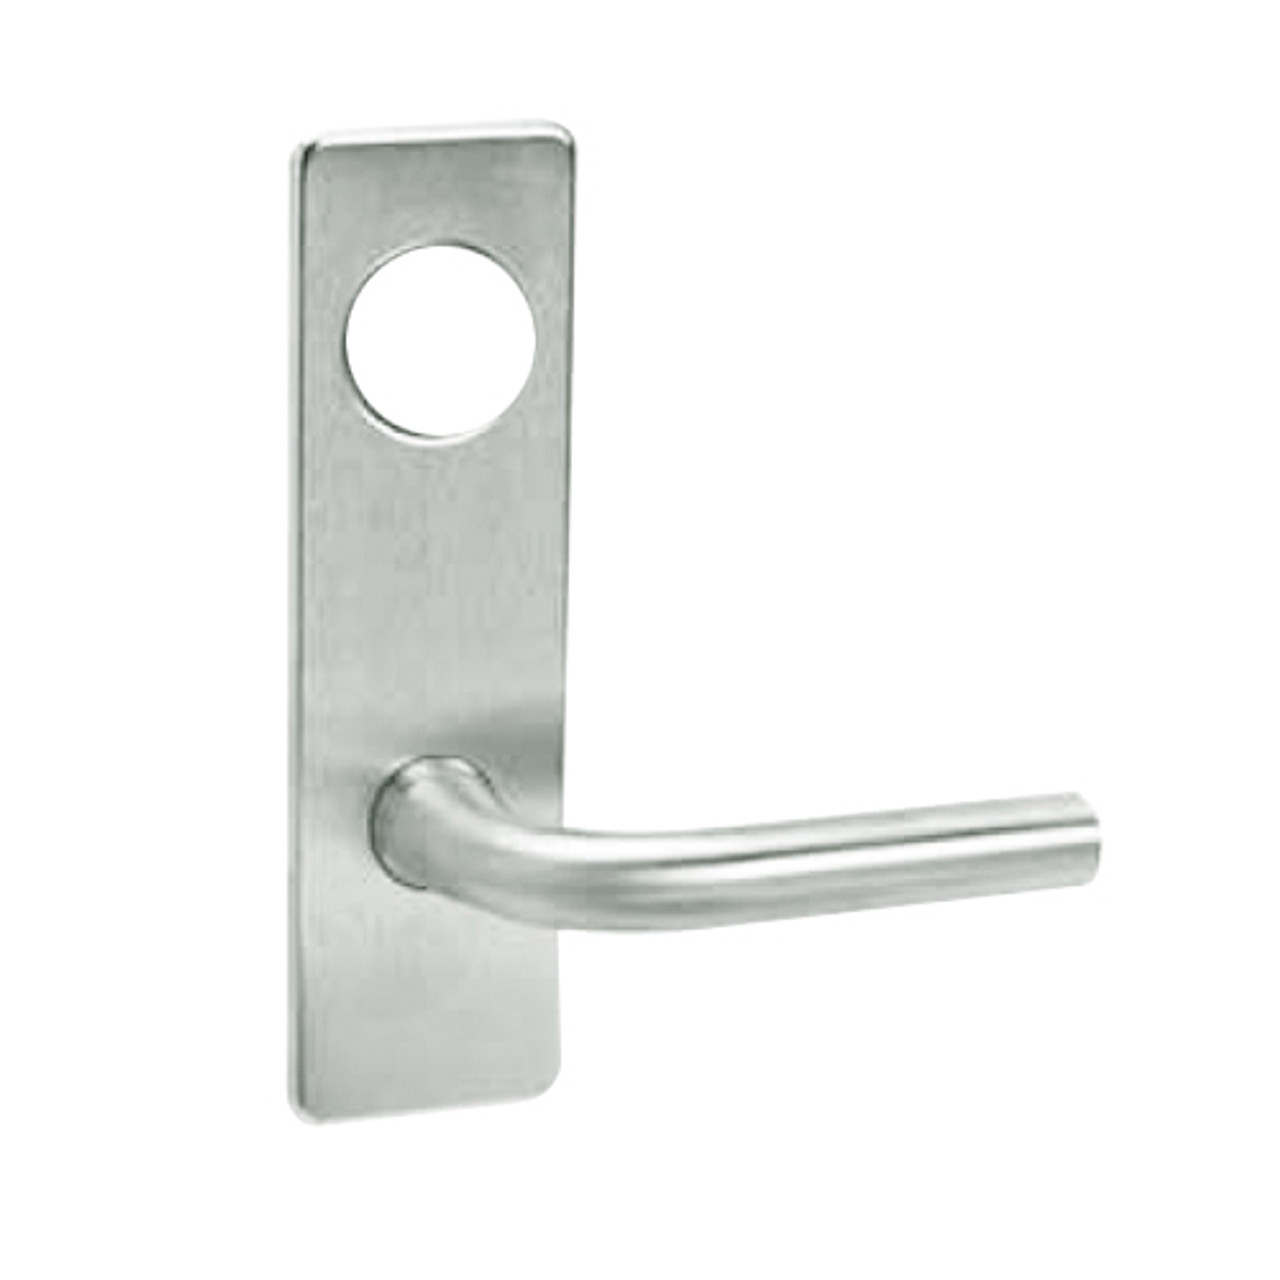 ML2069-RWN-618-CL7 Corbin Russwin ML2000 Series IC 7-Pin Less Core Mortise Institution Privacy Locksets with Regis Lever in Bright Nickel